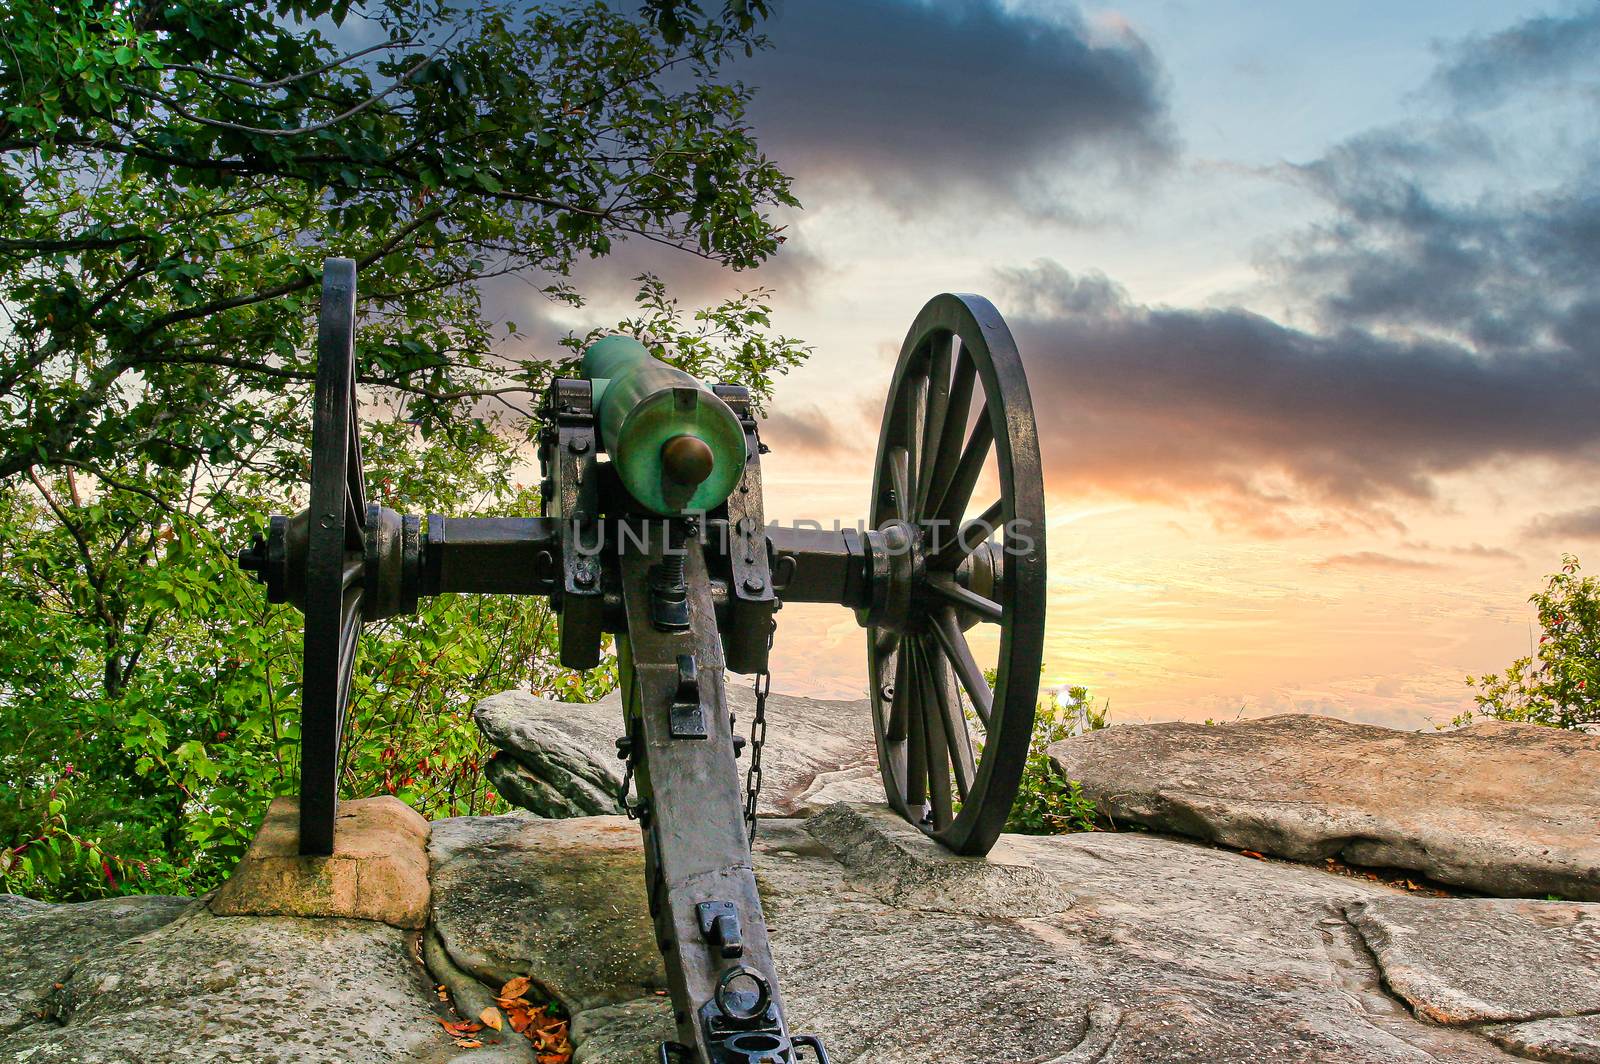 An old civil war cannon on a mountain fortification